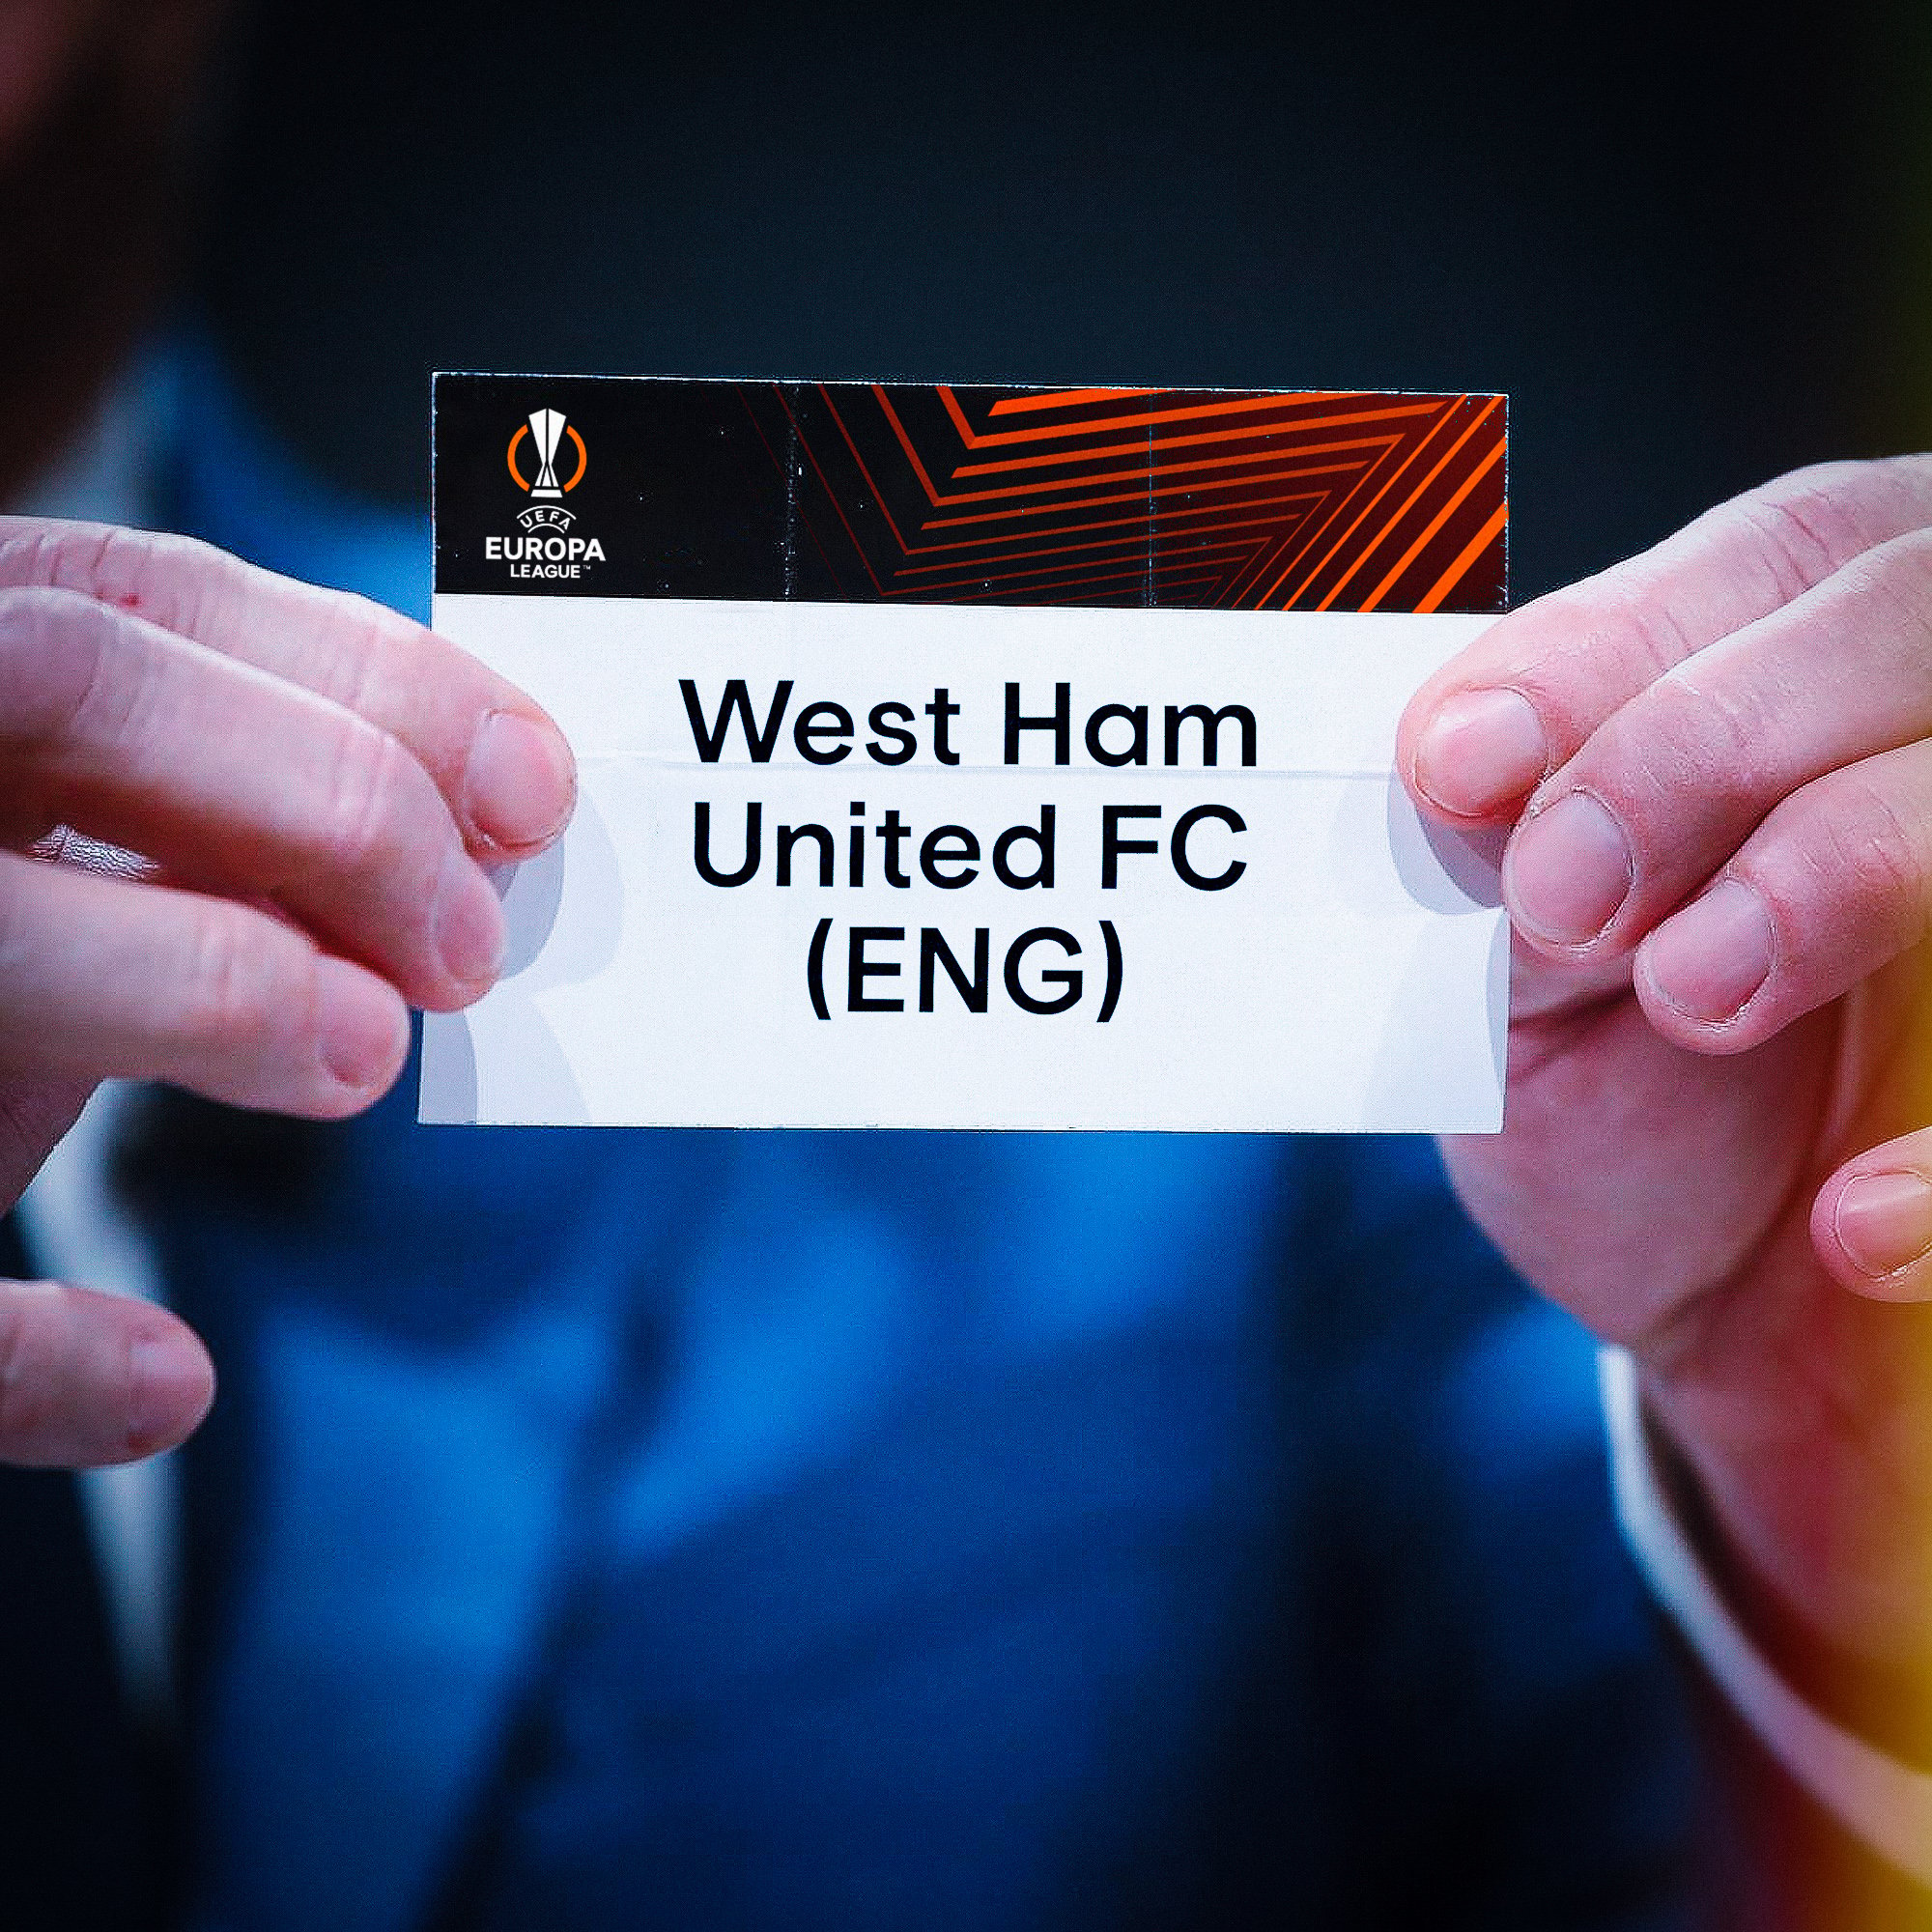 Eight teams West Ham cannot face in Europa League group stage draw